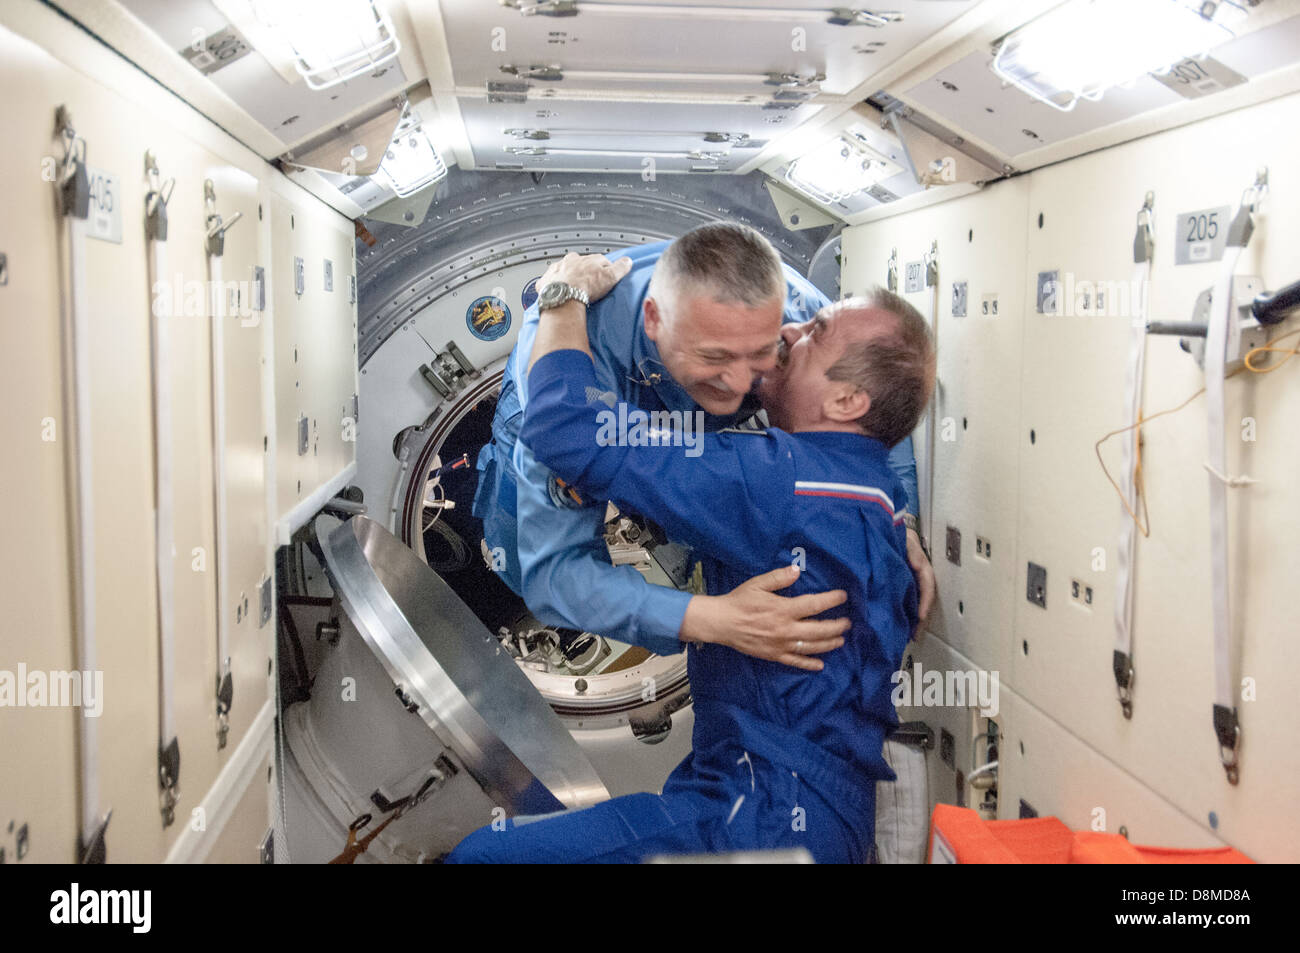 ISS Expedition 37 crew member Fyodor Yurchikhin is hugged by Expedition 36 Commander Pavel Vinogradov after arriving at the International Space Station May 29, 2013. Stock Photo